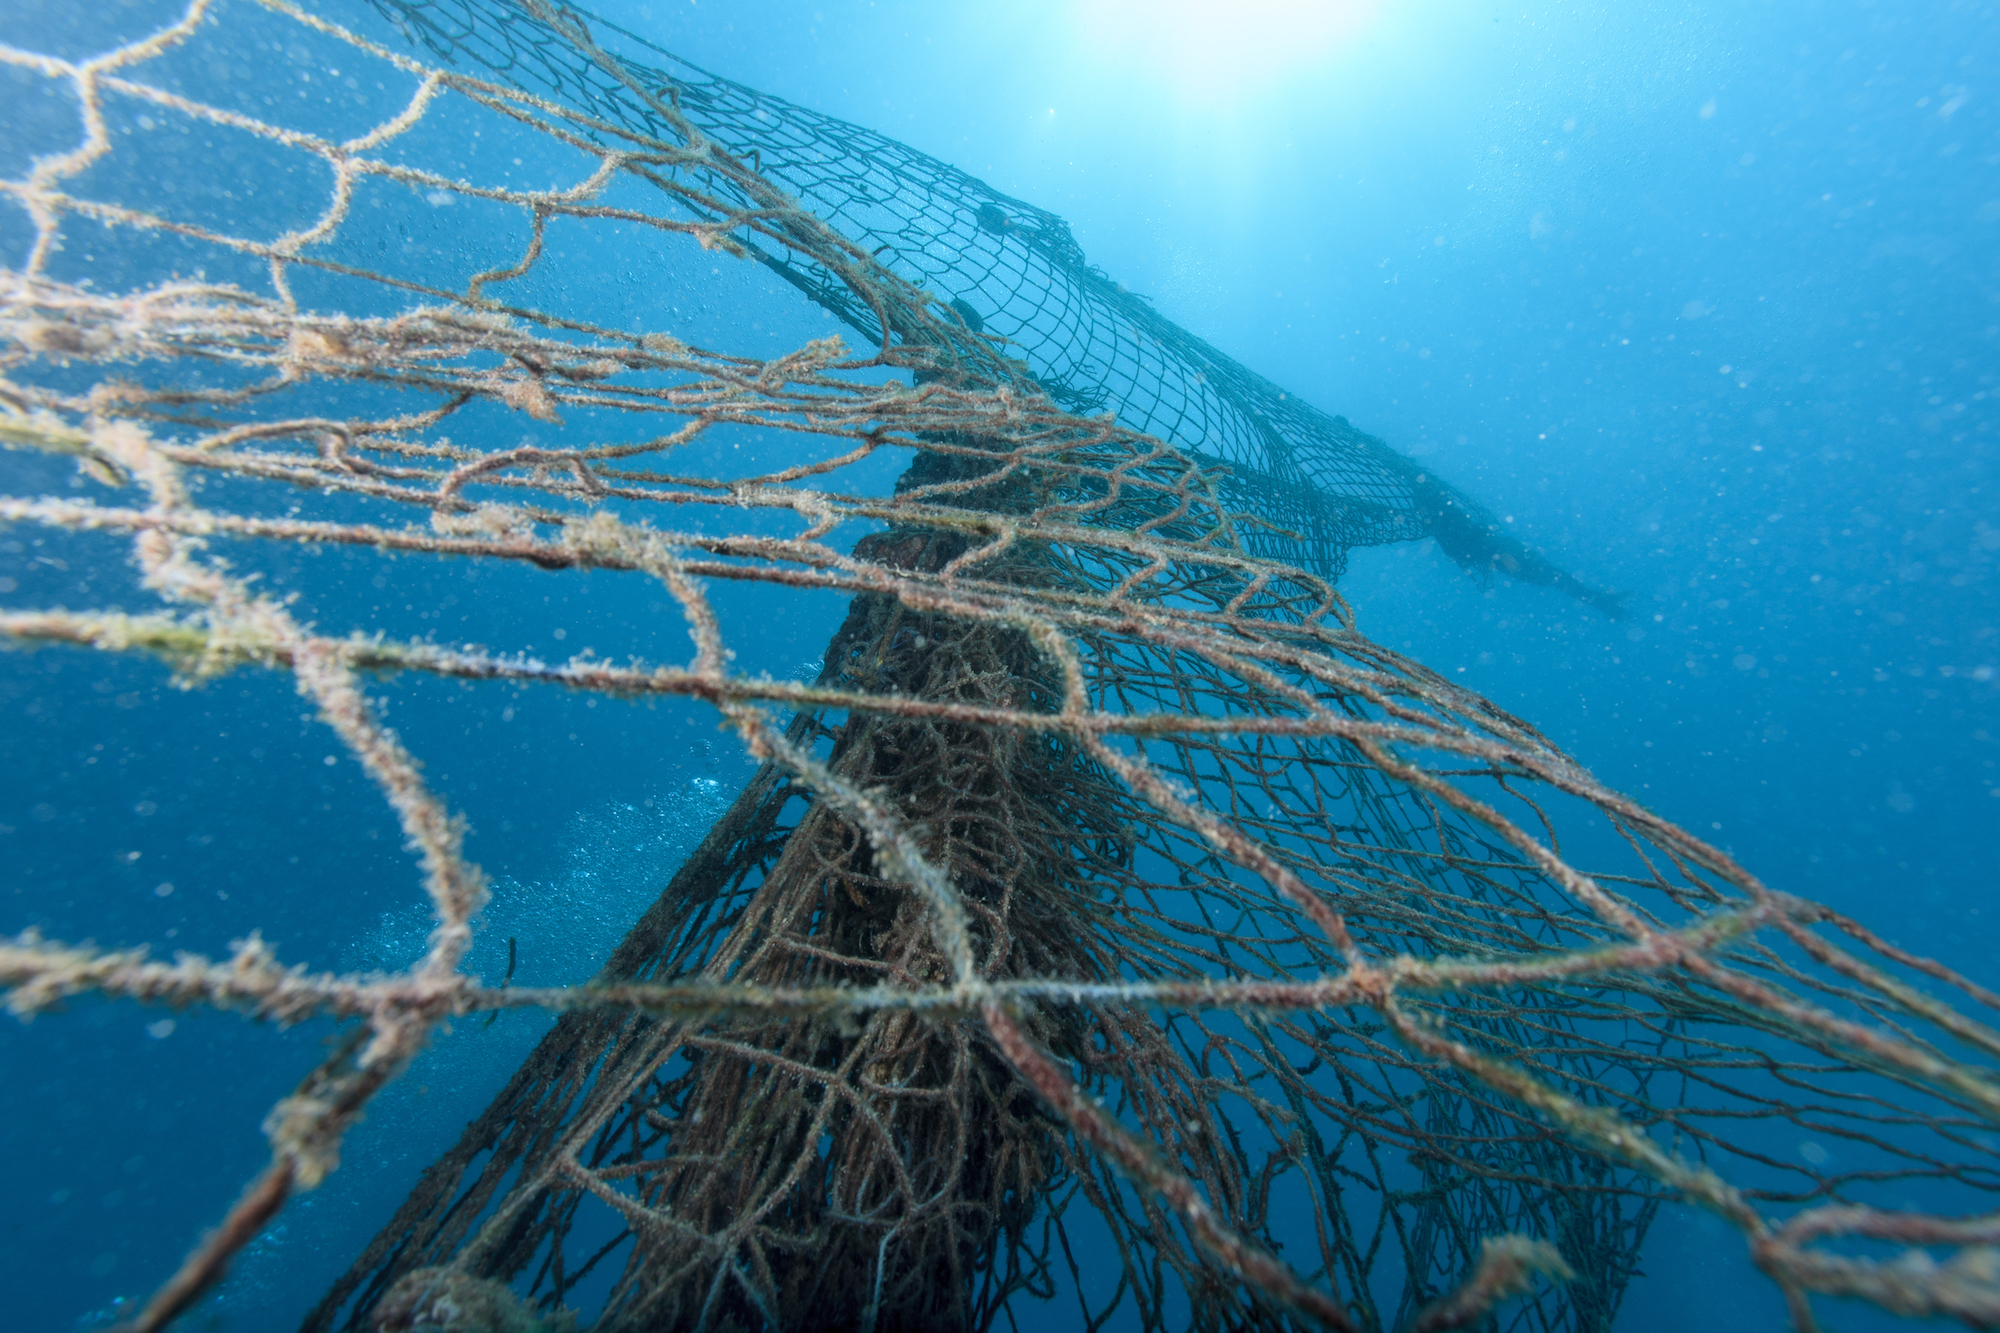 Ghost Fishing: an ecological and socio-economic challenge - MantaWatch